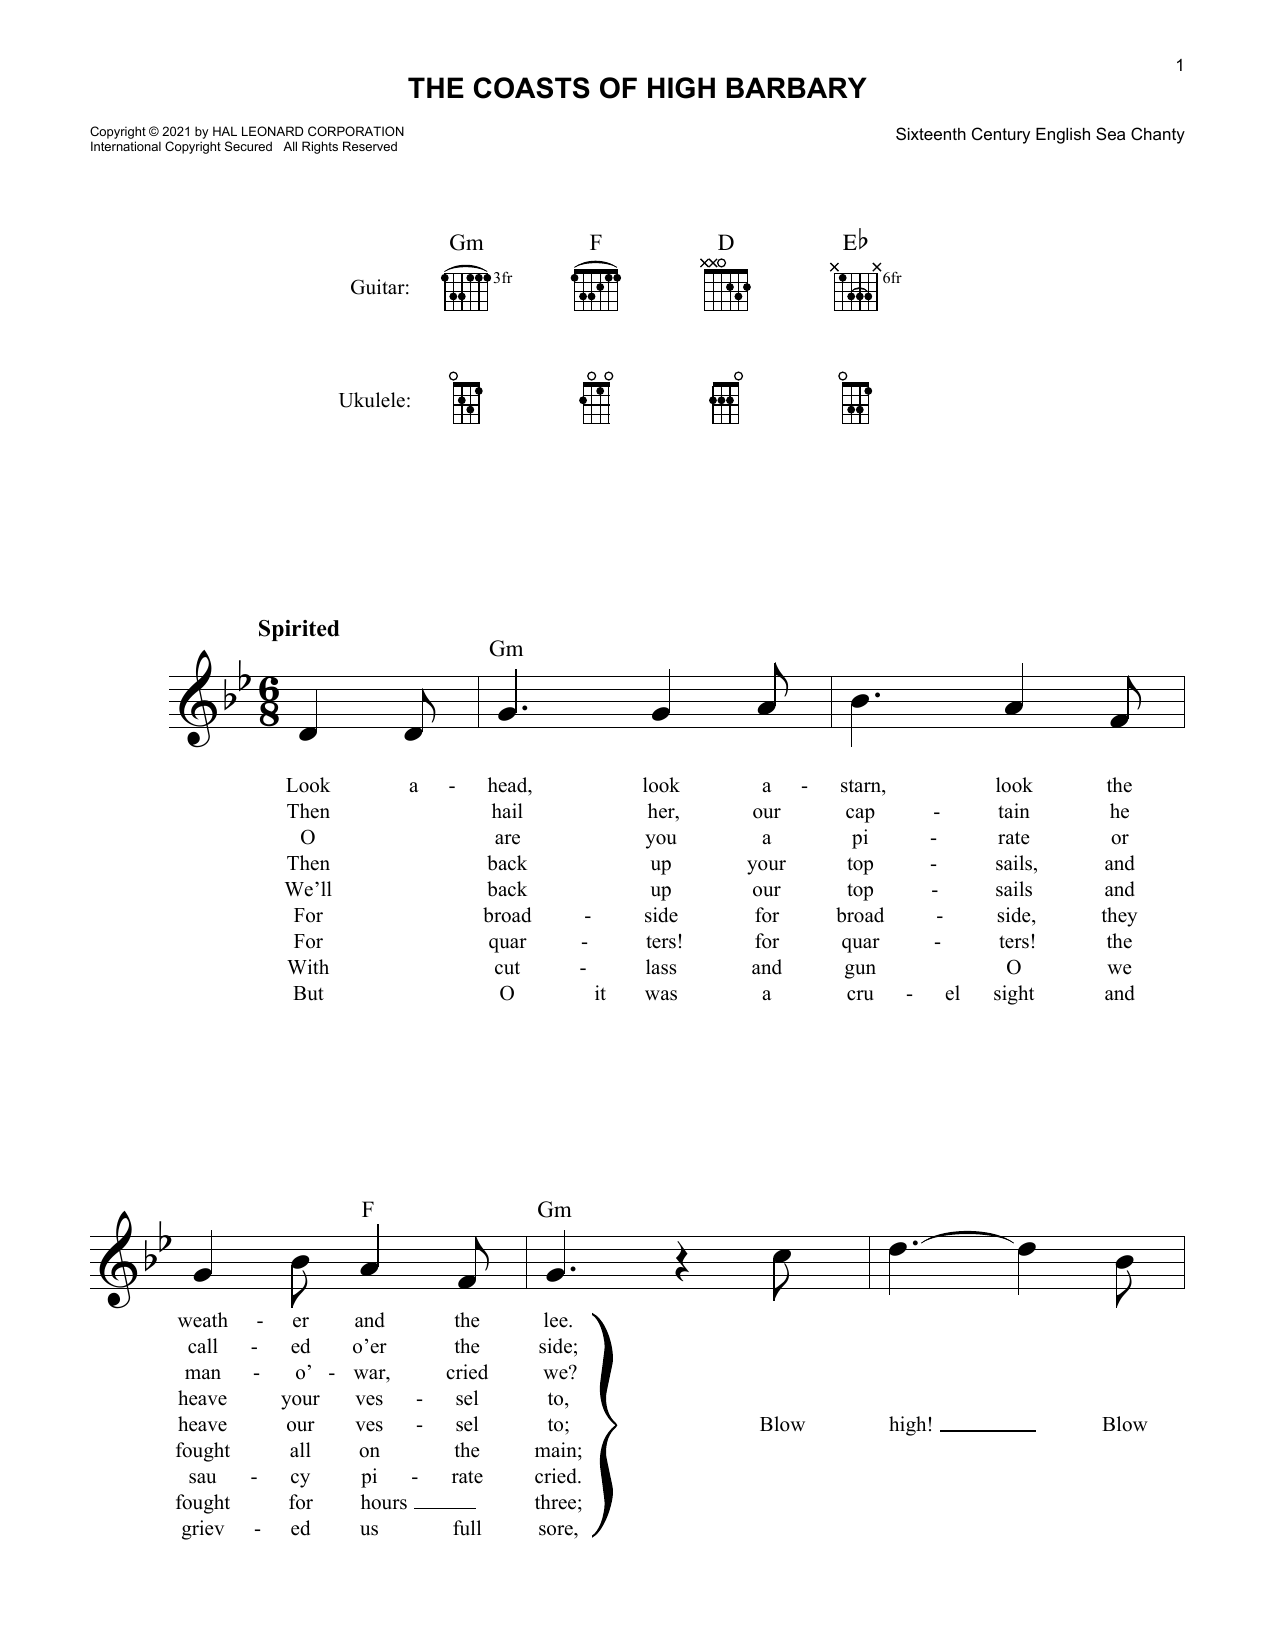 Download 16th Century Sea Chanty The Coasts Of High Barbary Sheet Music